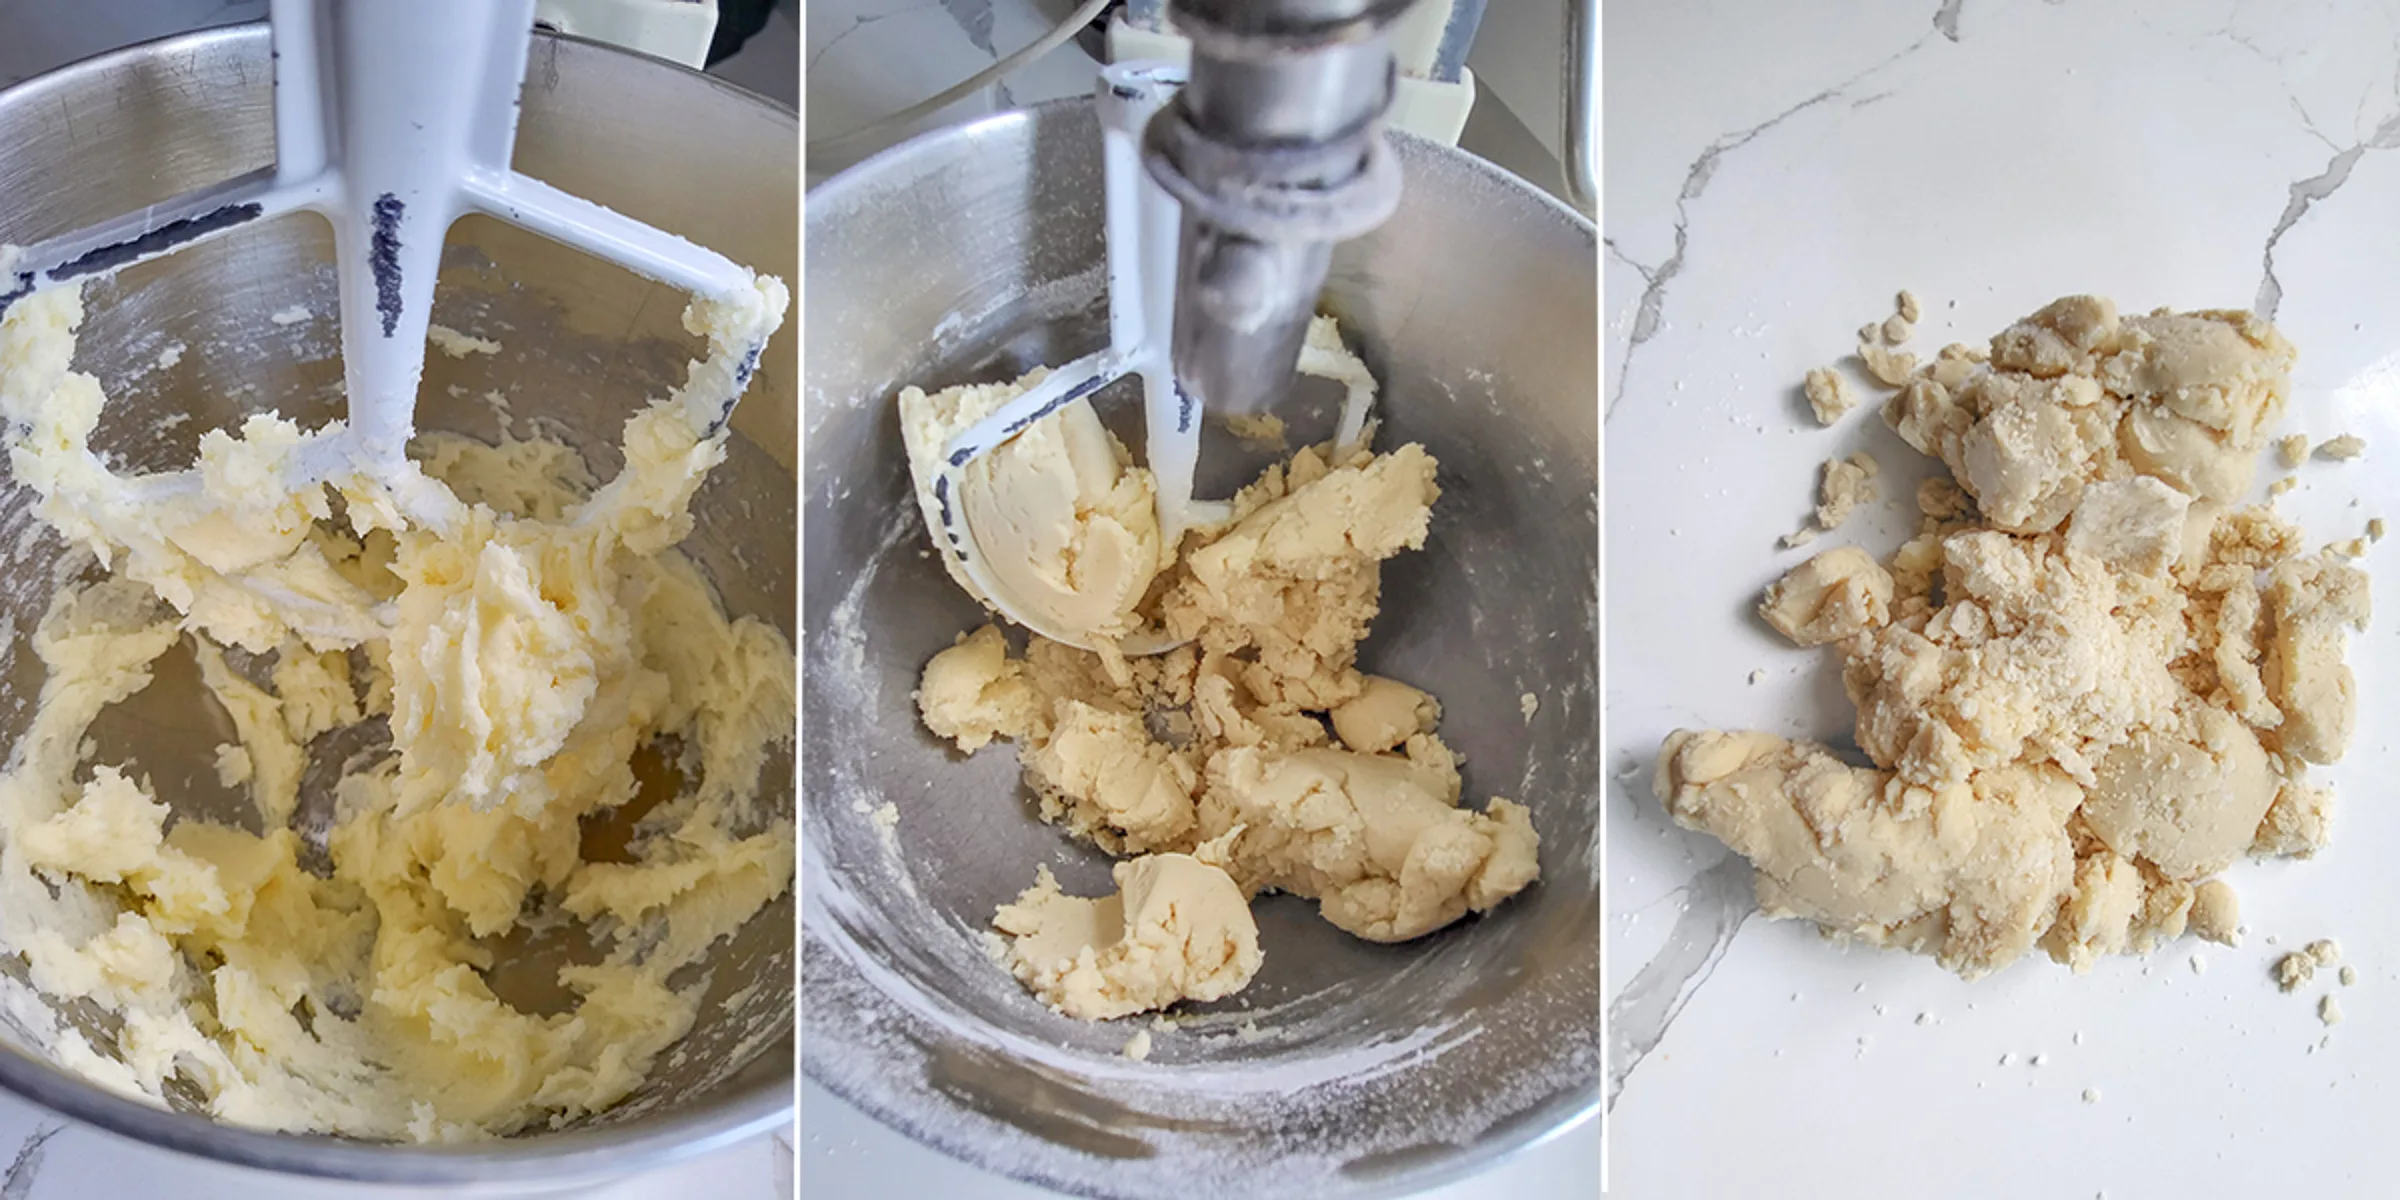 A mixing bowl with butter and sugar. A mixing bowl with cookie dough. A white surface with unkneaded cookie dough.